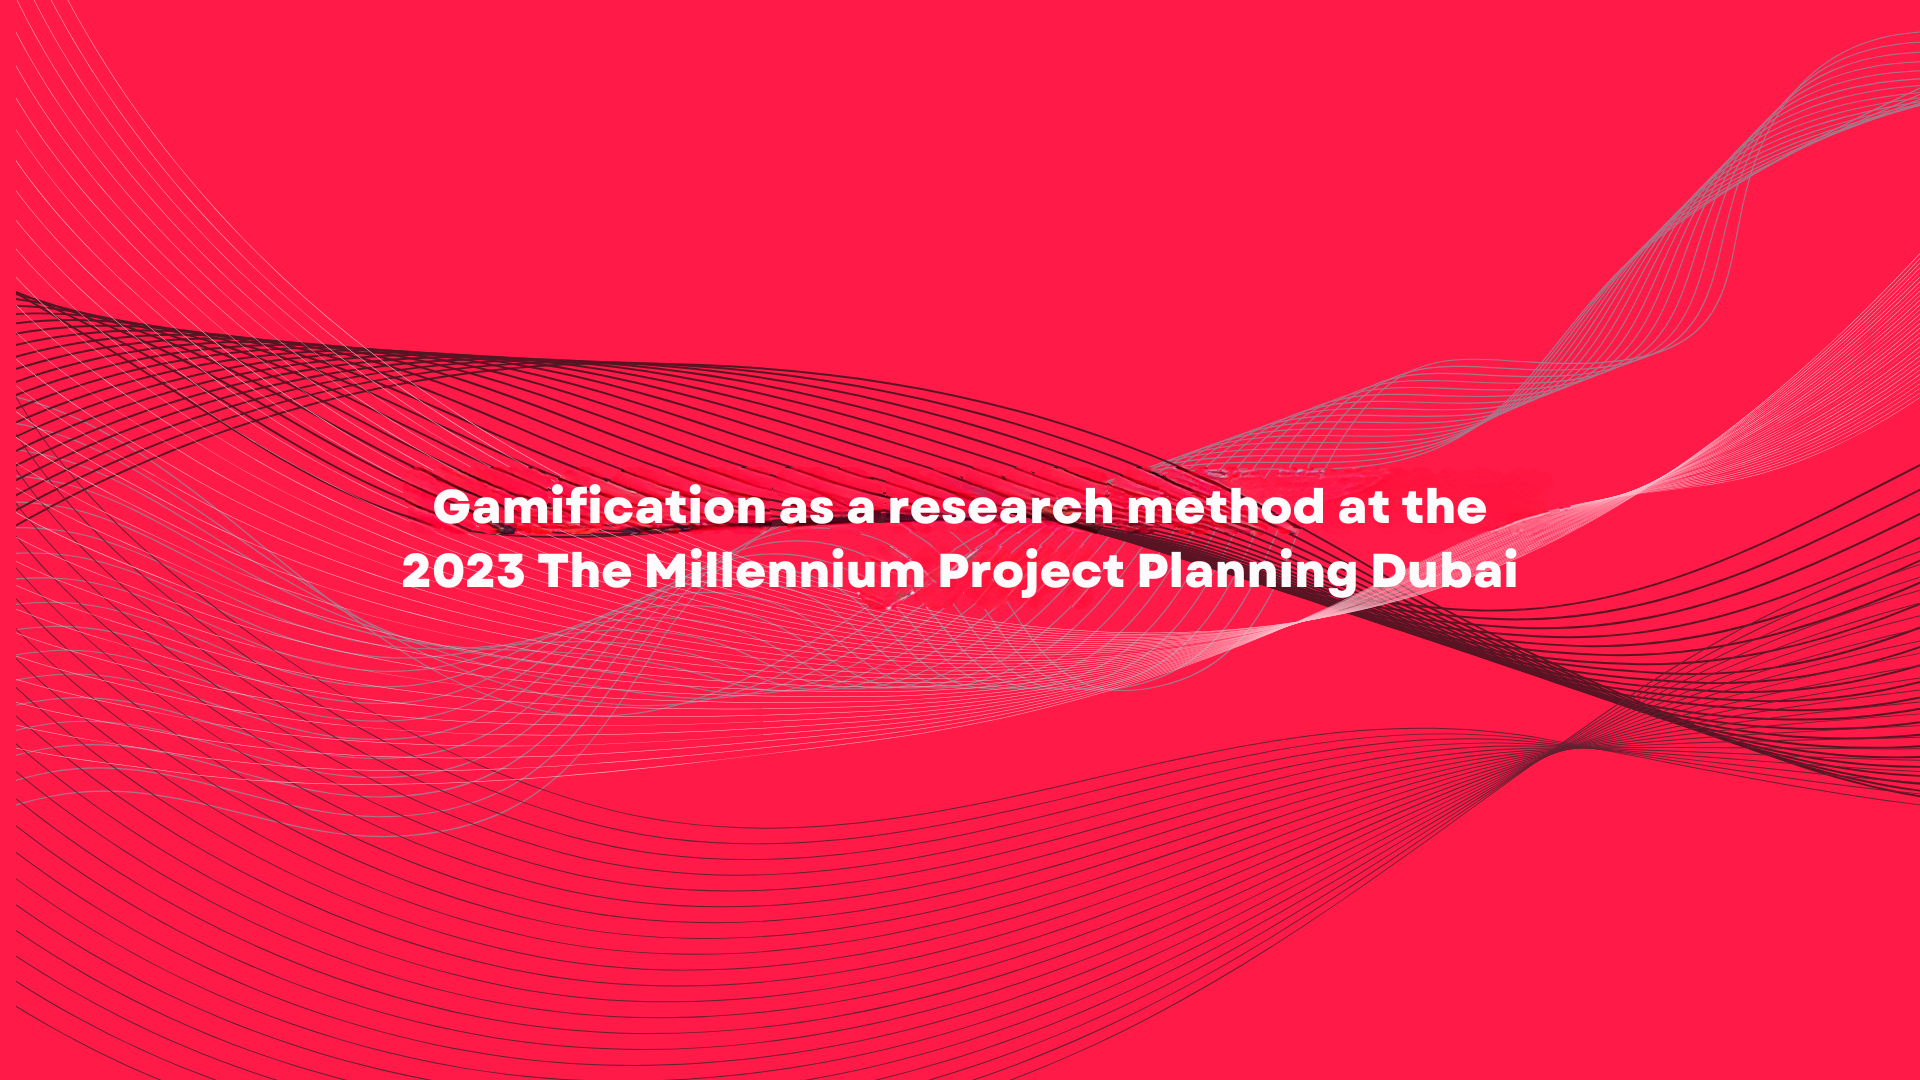 Gamification as a research method at the 2023 The Millennium Project Planning Dubai